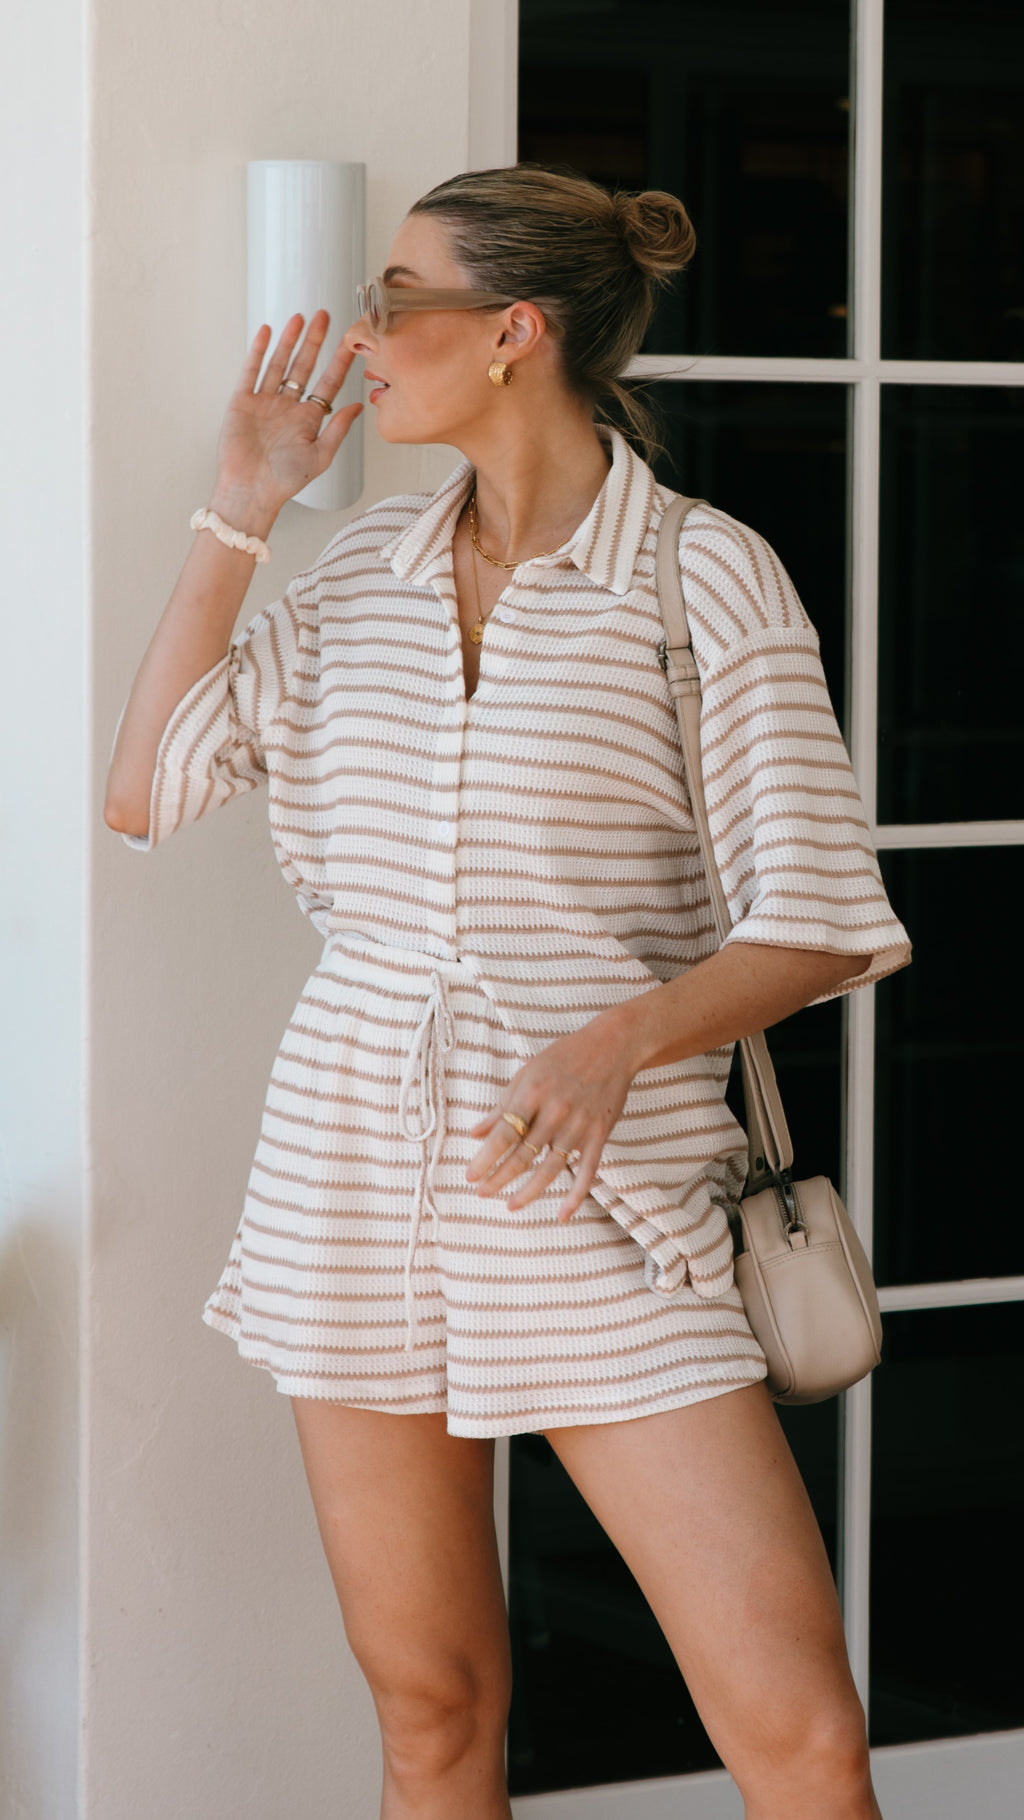 Lacole Button Up Shirt and Shorts Set - White / Beige Stripe - Billy J